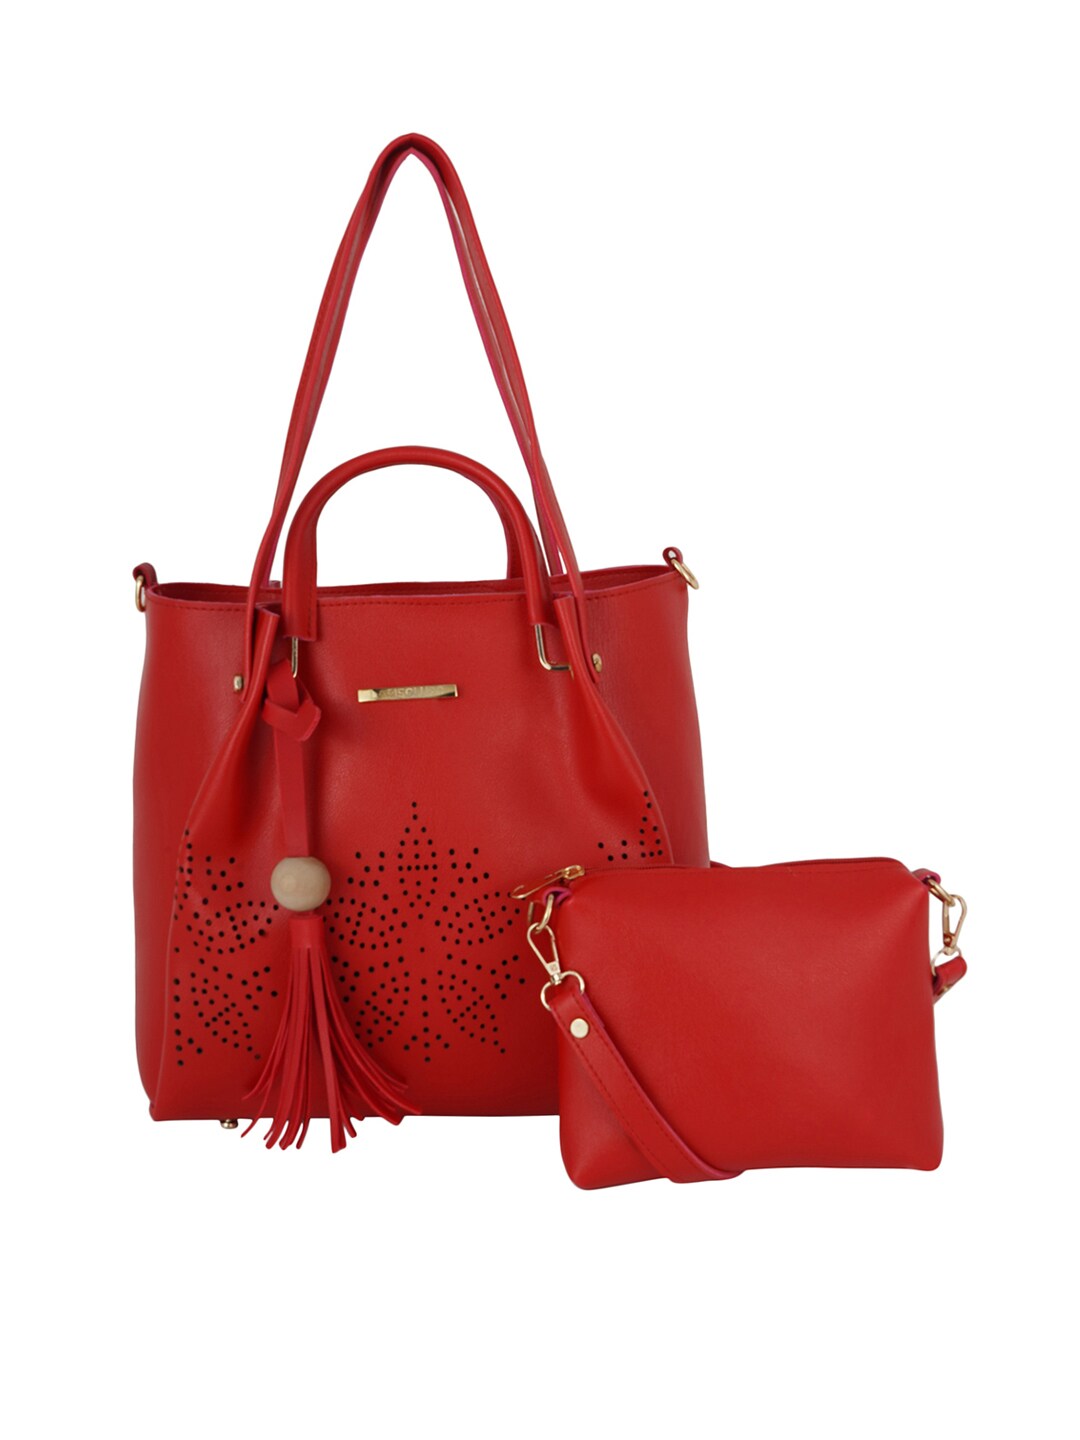 Lapis O Lupo Red Solid Shoulder Bag Set Price in India